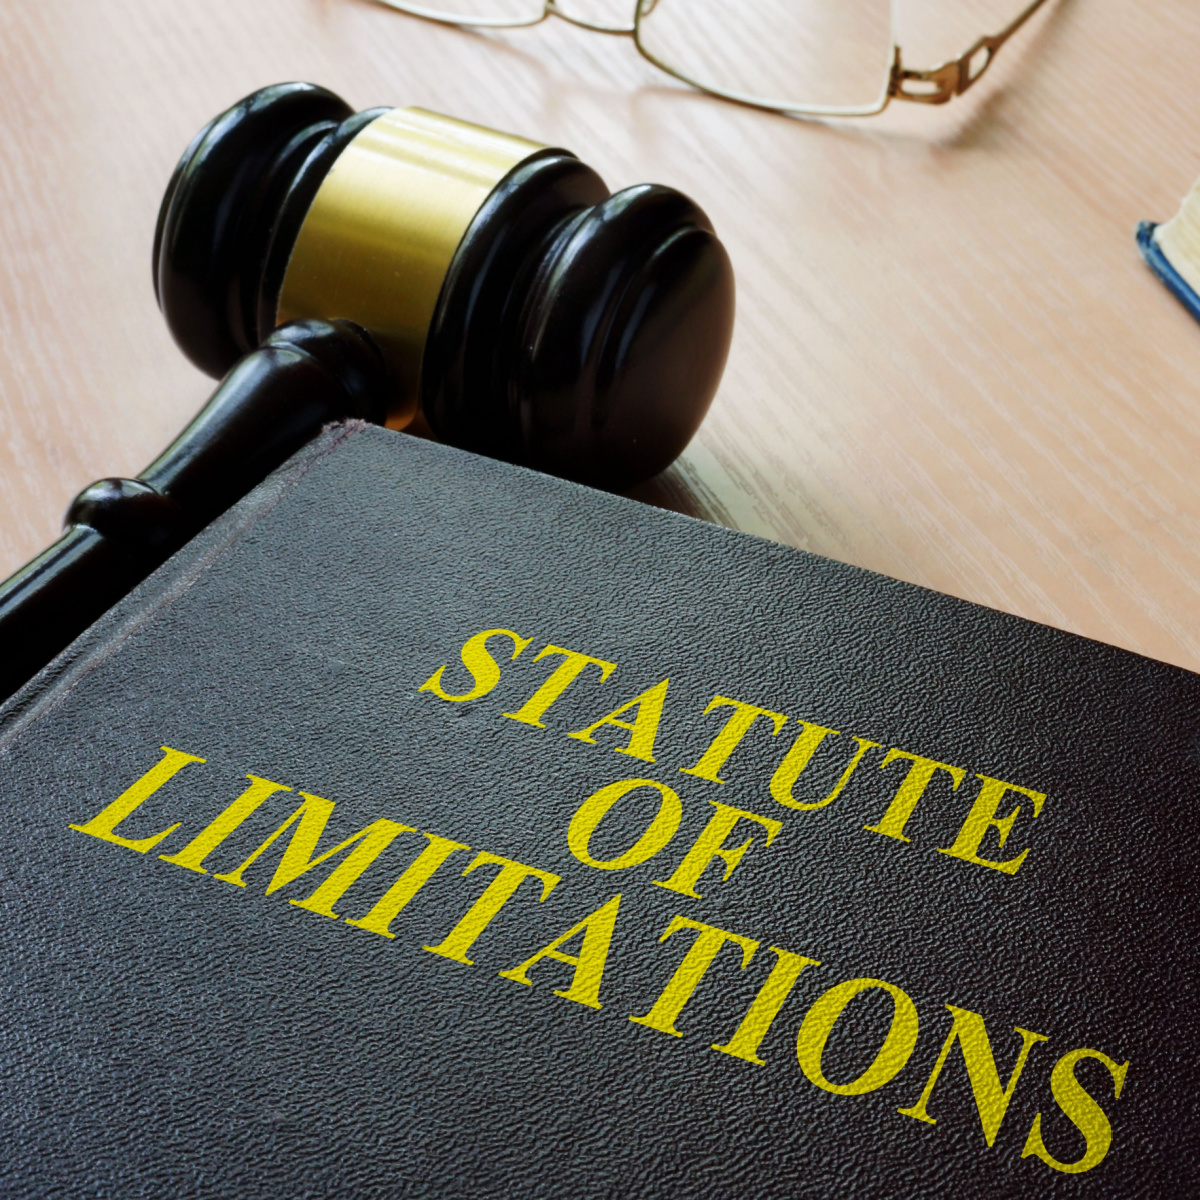 Reference material for statute of limitations for personal injury claims in Houston.